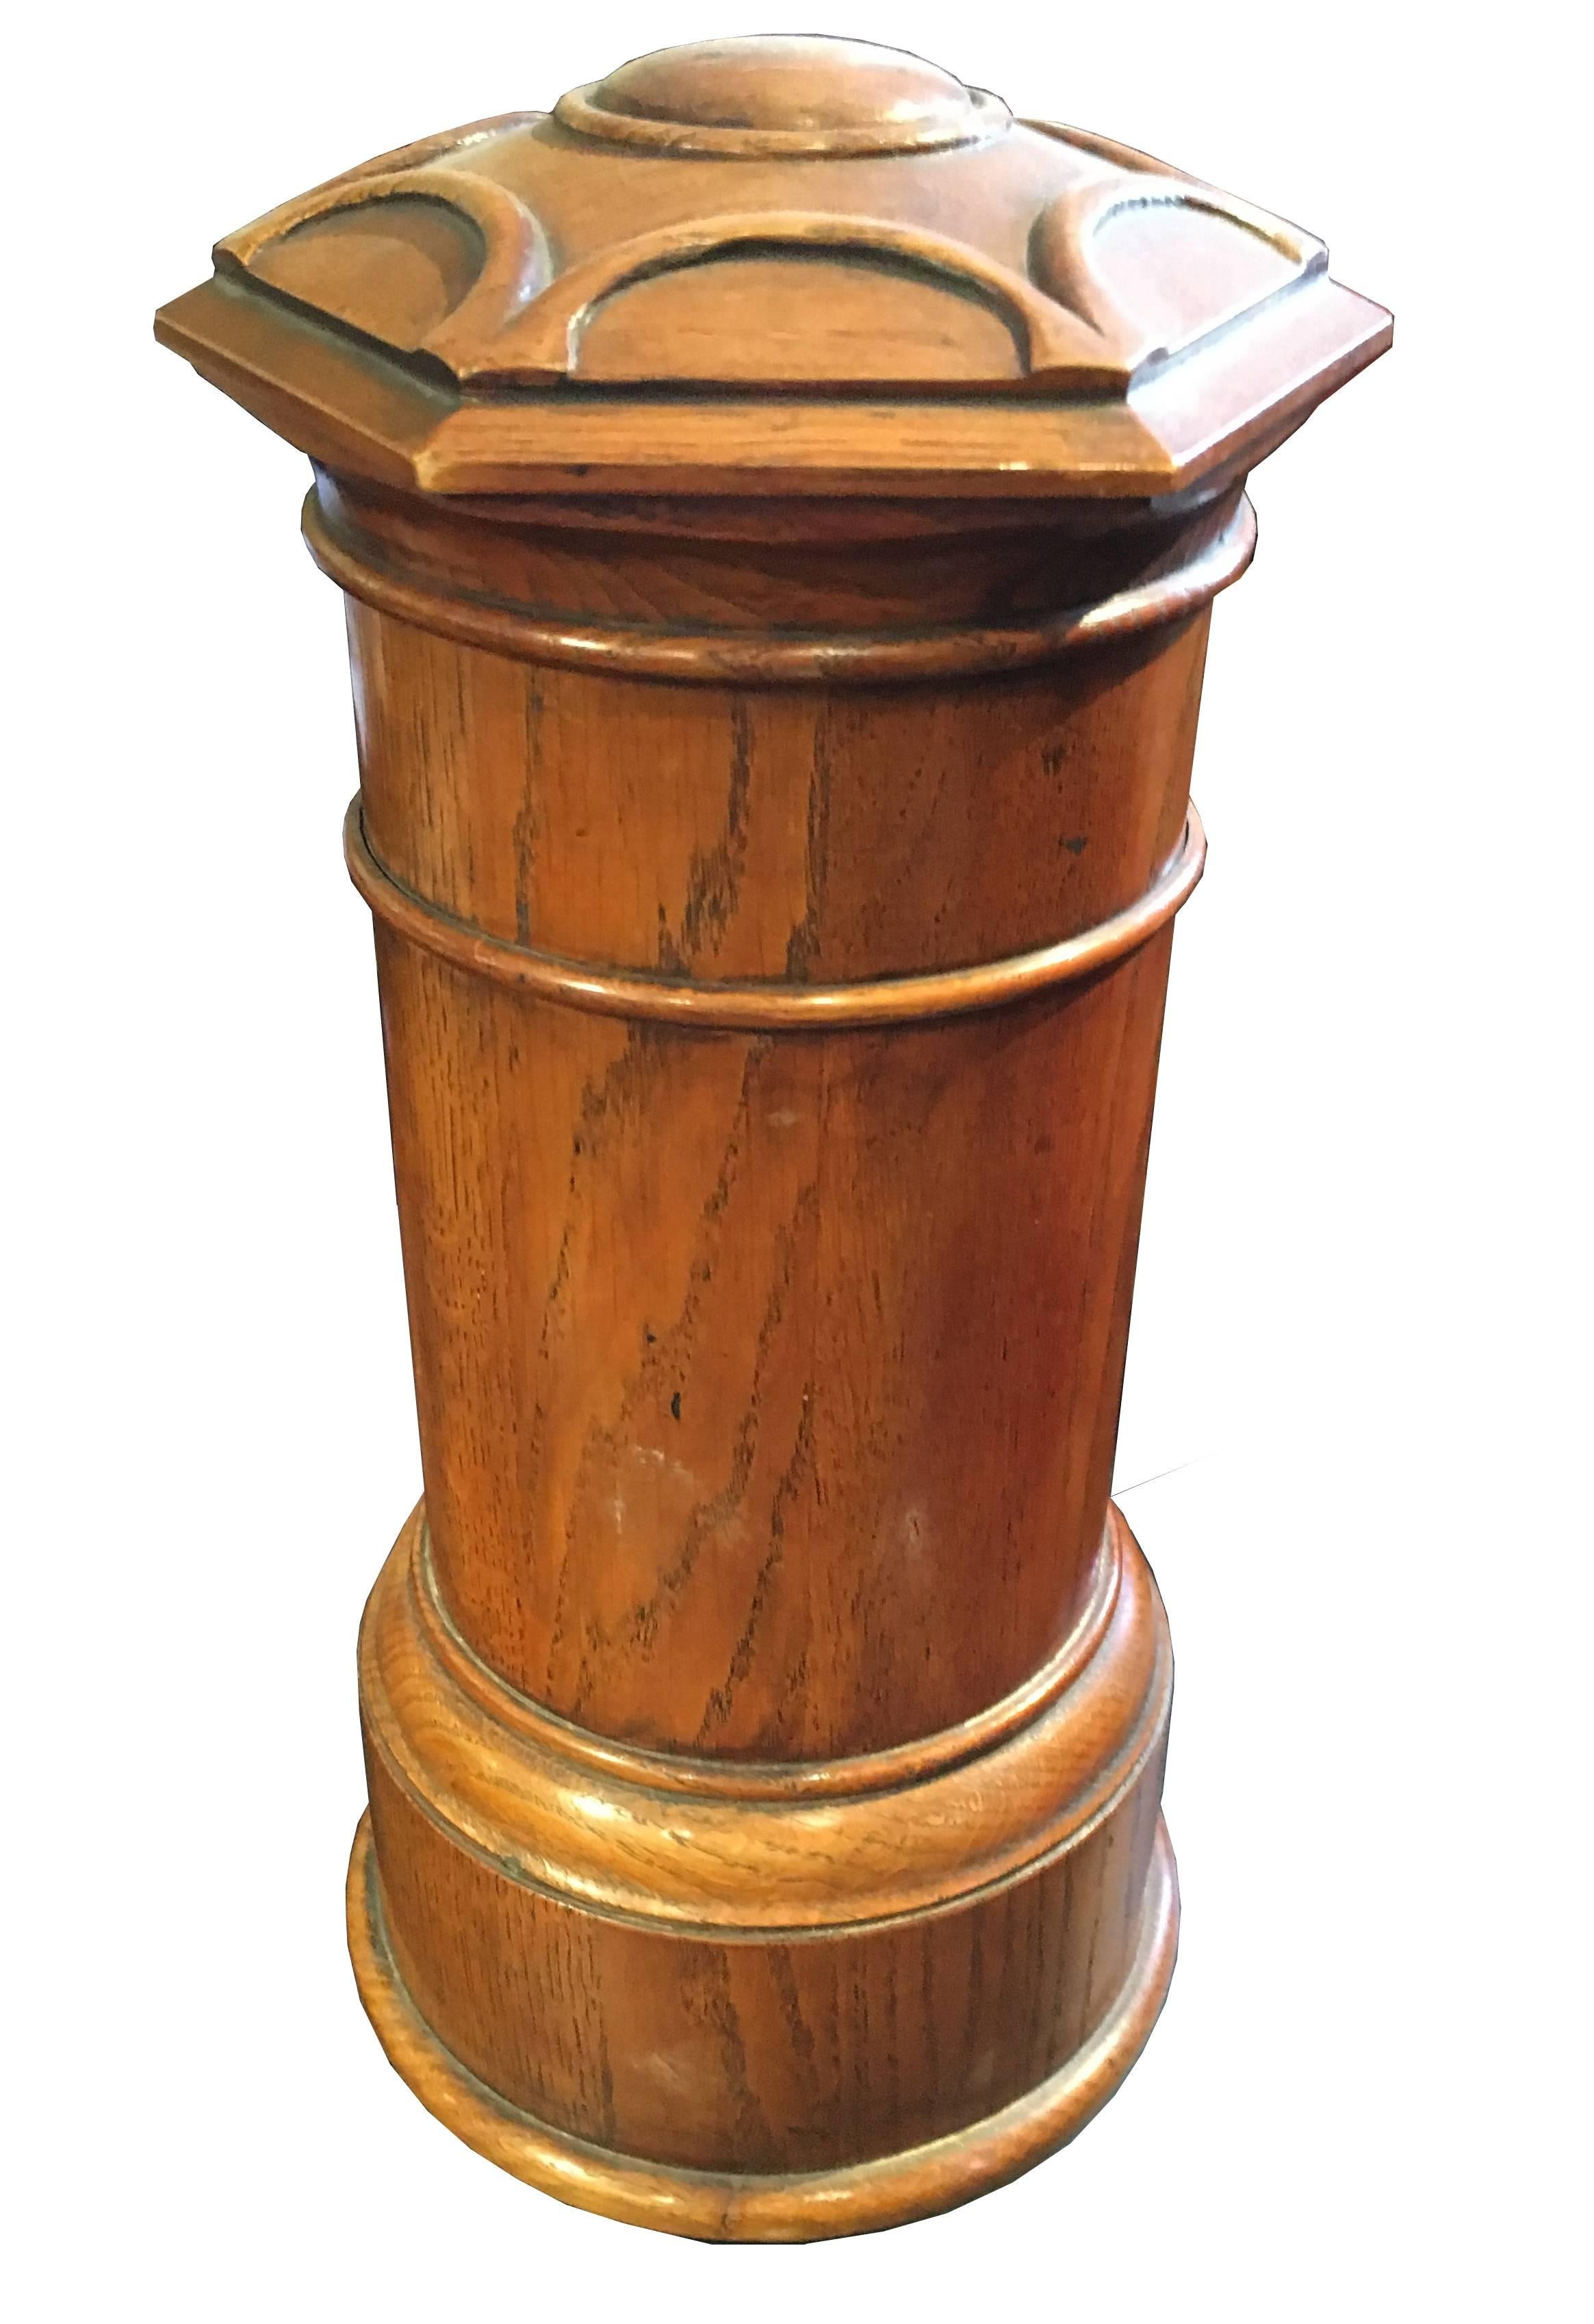 A late 19th century oak country house postbox. English, circa 1884. Height 15 1/4 inches.

A rare and unusual Victorian oak and brass country house postbox, Victorian, circa 1884. The postbox is lined with its original leather, outside the door